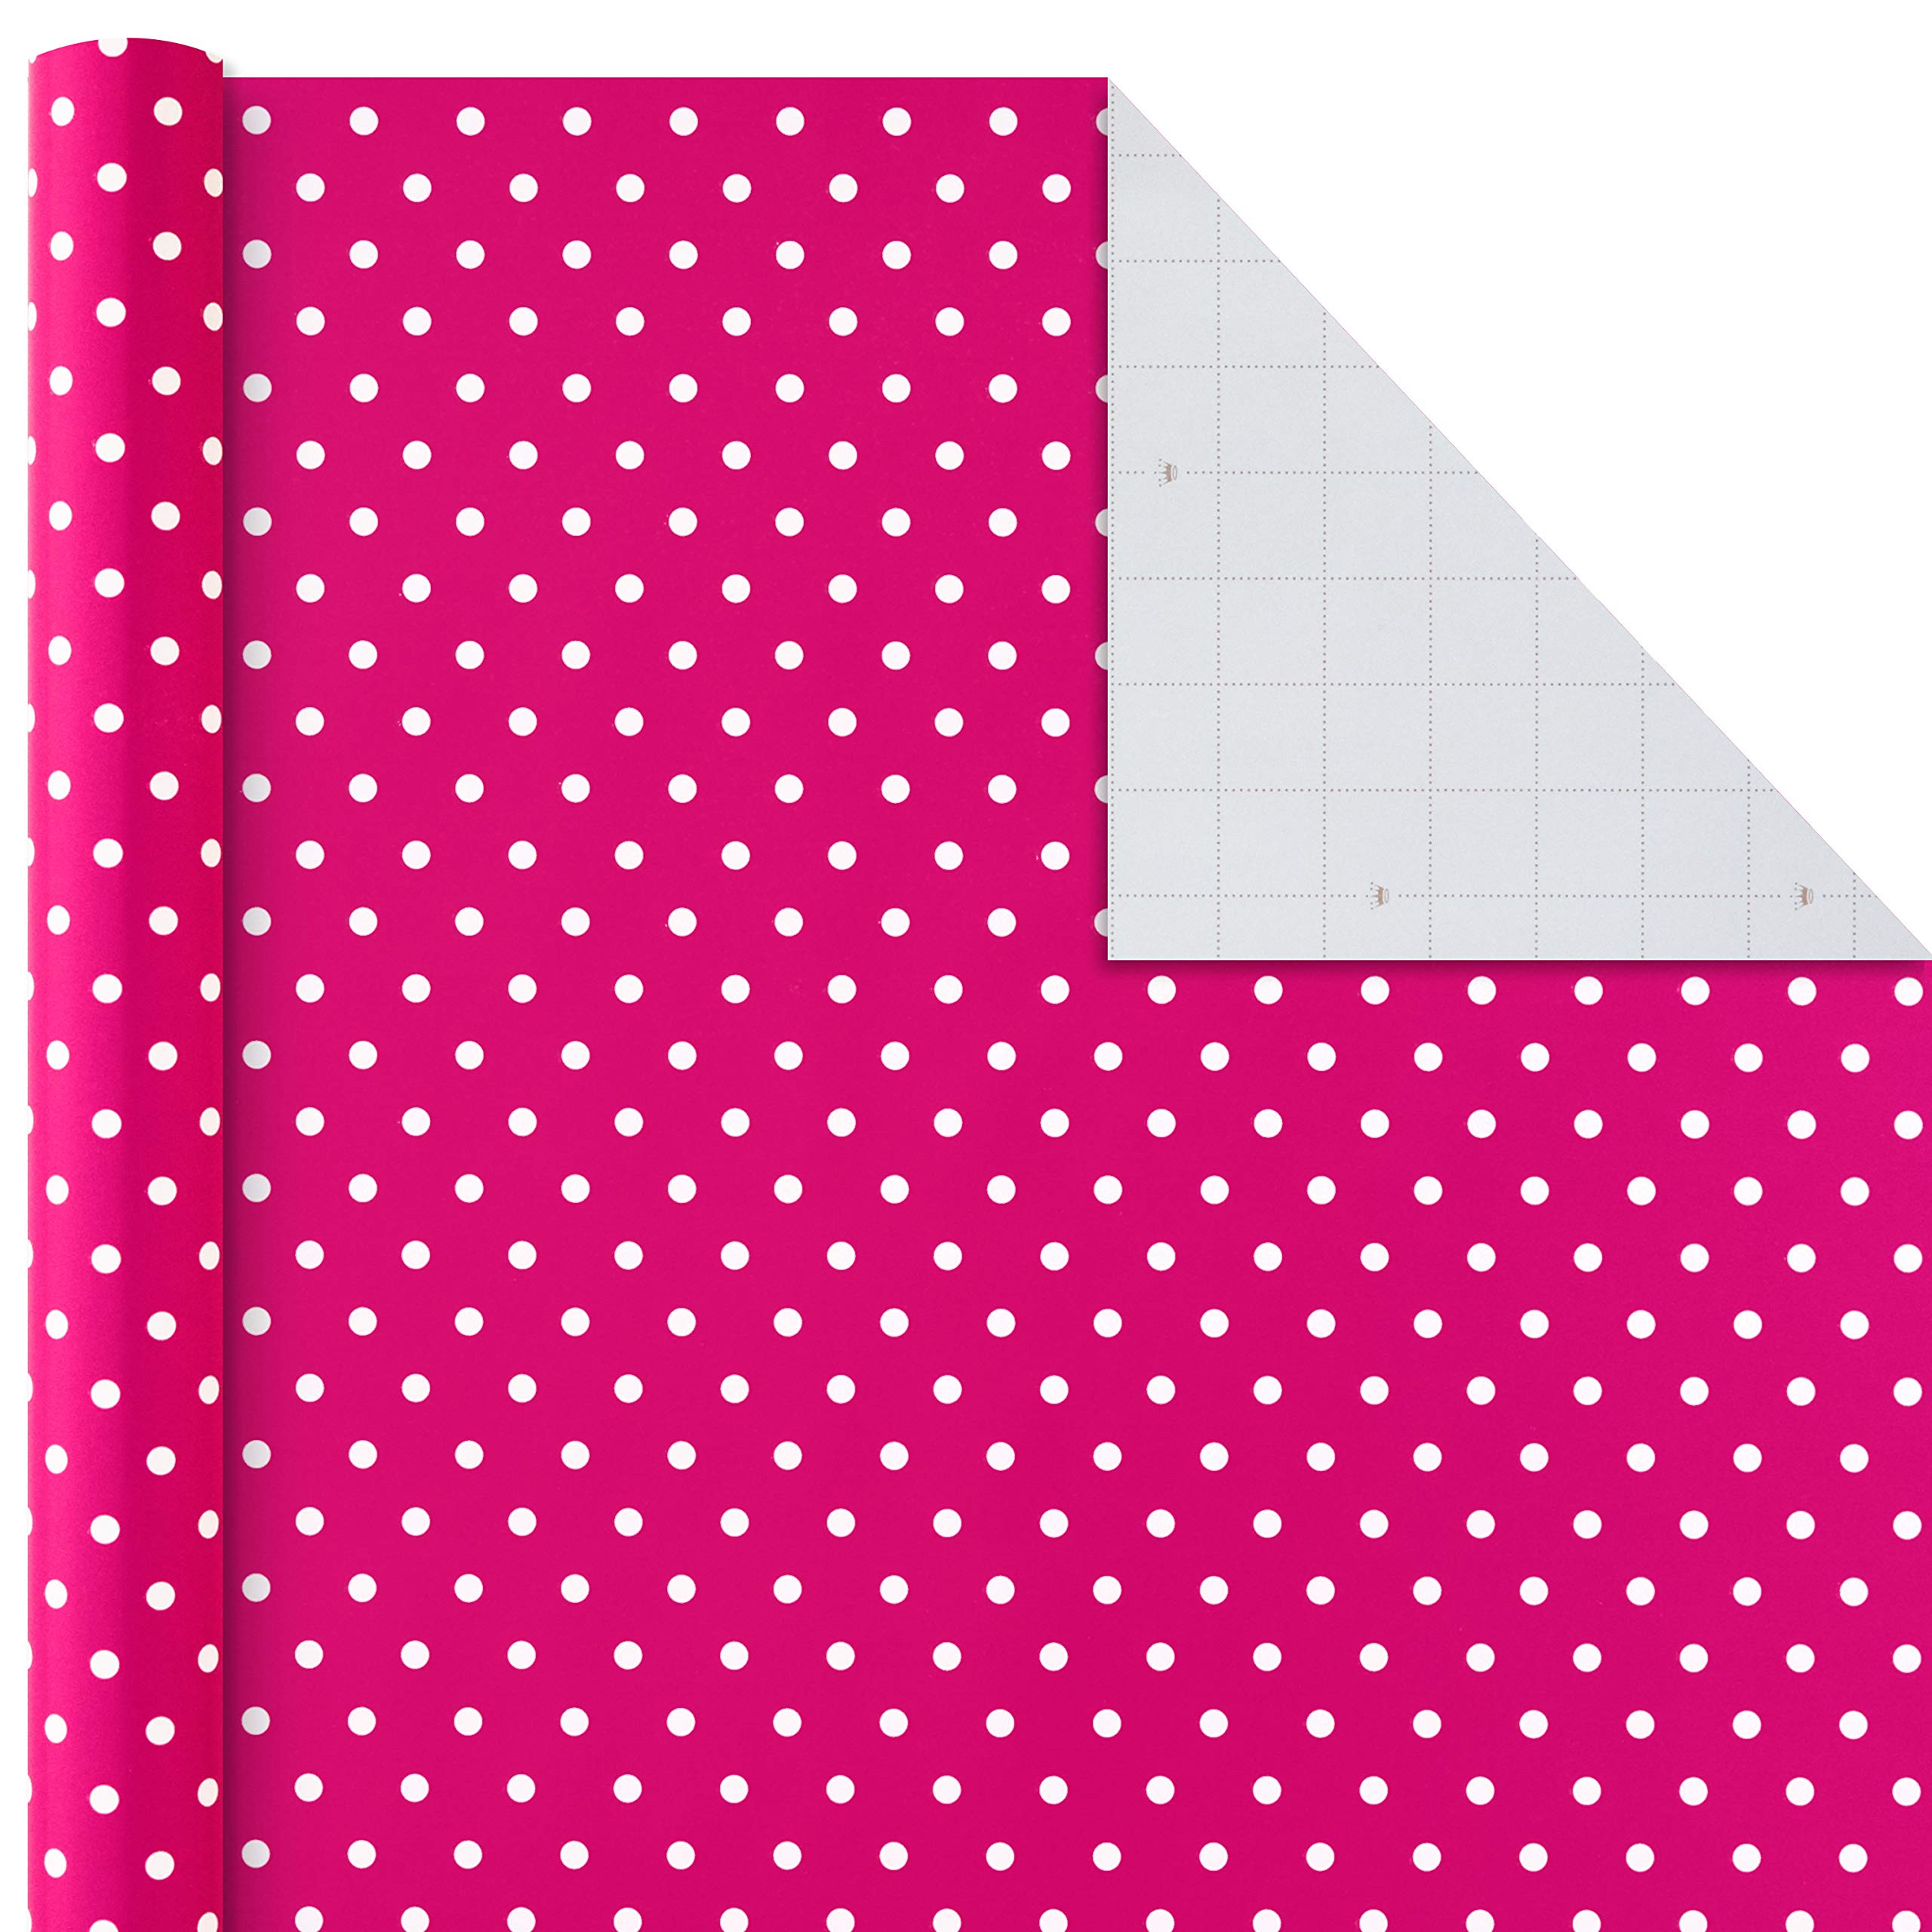 Hallmark All Occasion Wrapping Paper Bundle with Cut Lines on Reverse (Pack of 6; 180 sq. ft. ttl.) Solids, Polka Dots & Stripes for Birthdays, Easter, Mothers Day, Weddings, Baby Showers (5JXW1746)